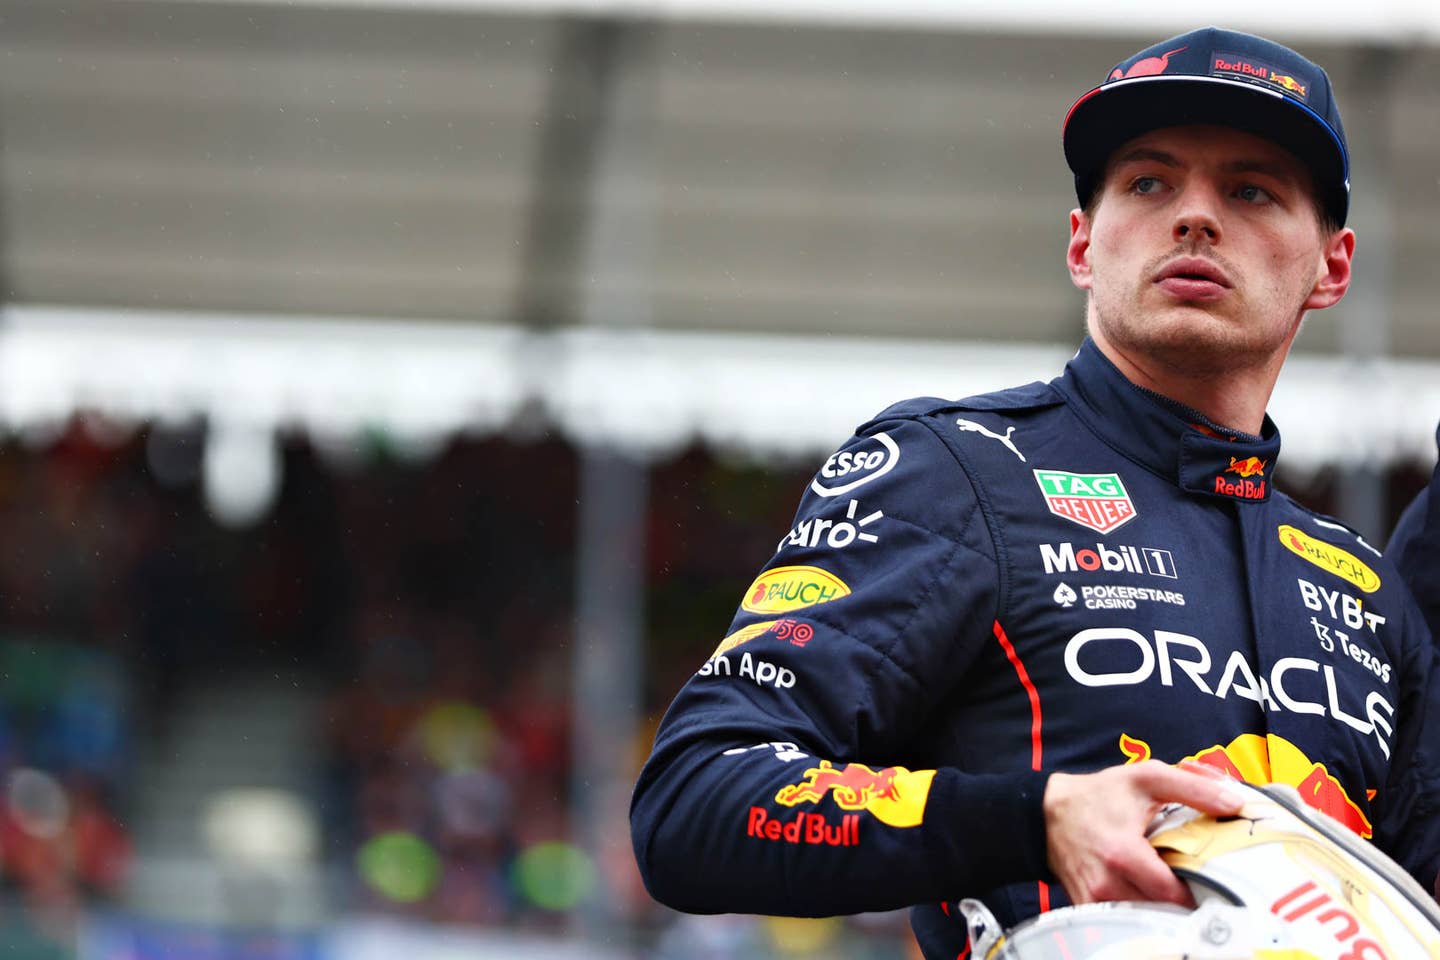 NORTHAMPTON, ENGLAND - JULY 02: Second placed qualifier Max Verstappen of the Netherlands and Oracle Red Bull Racing looks on in parc ferme during qualifying ahead of the F1 Grand Prix of Great Britain at Silverstone on July 02, 2022 in Northampton, England. (Photo by Mark Thompson/Getty Images)